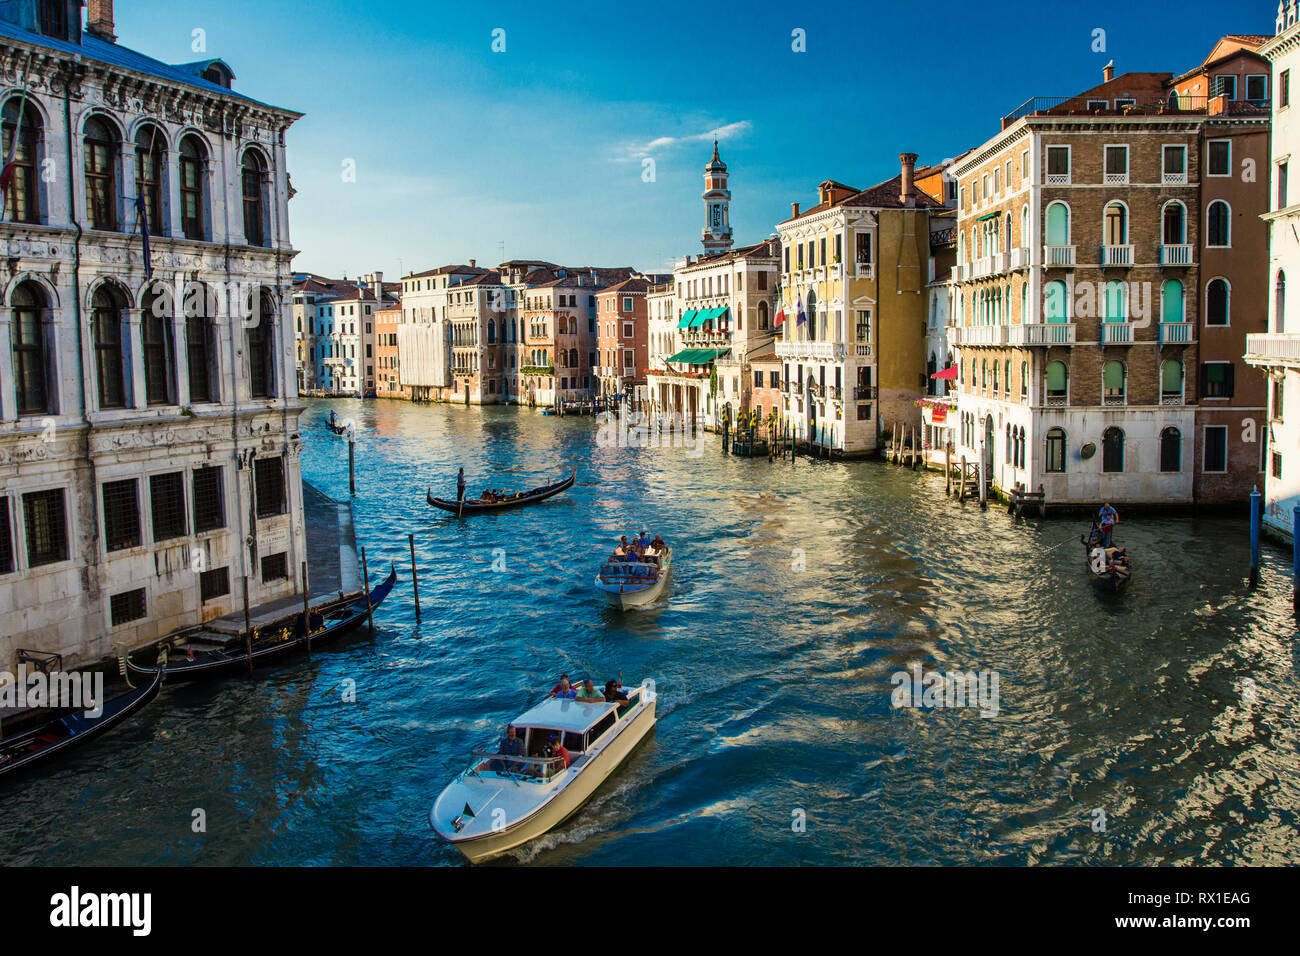 Venice/Italy - 5 June, 2012: The view of Grand Canal with gondoliers and tourist boats from Rialto Bridge. Stock Photo